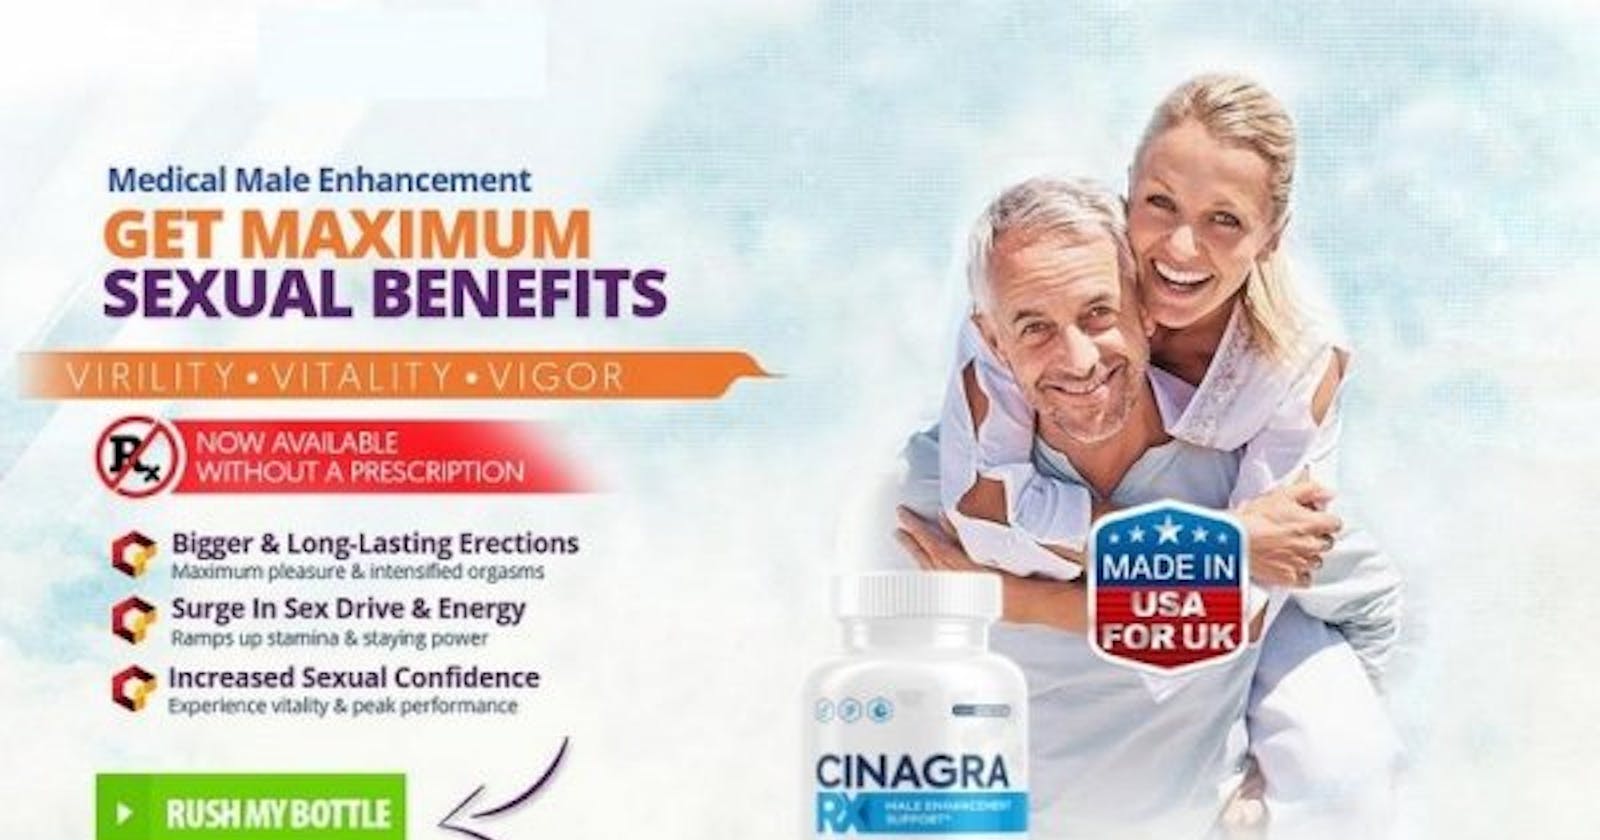 Cinagra RX Male Enhancement Natural & 100% Safe! To Uses